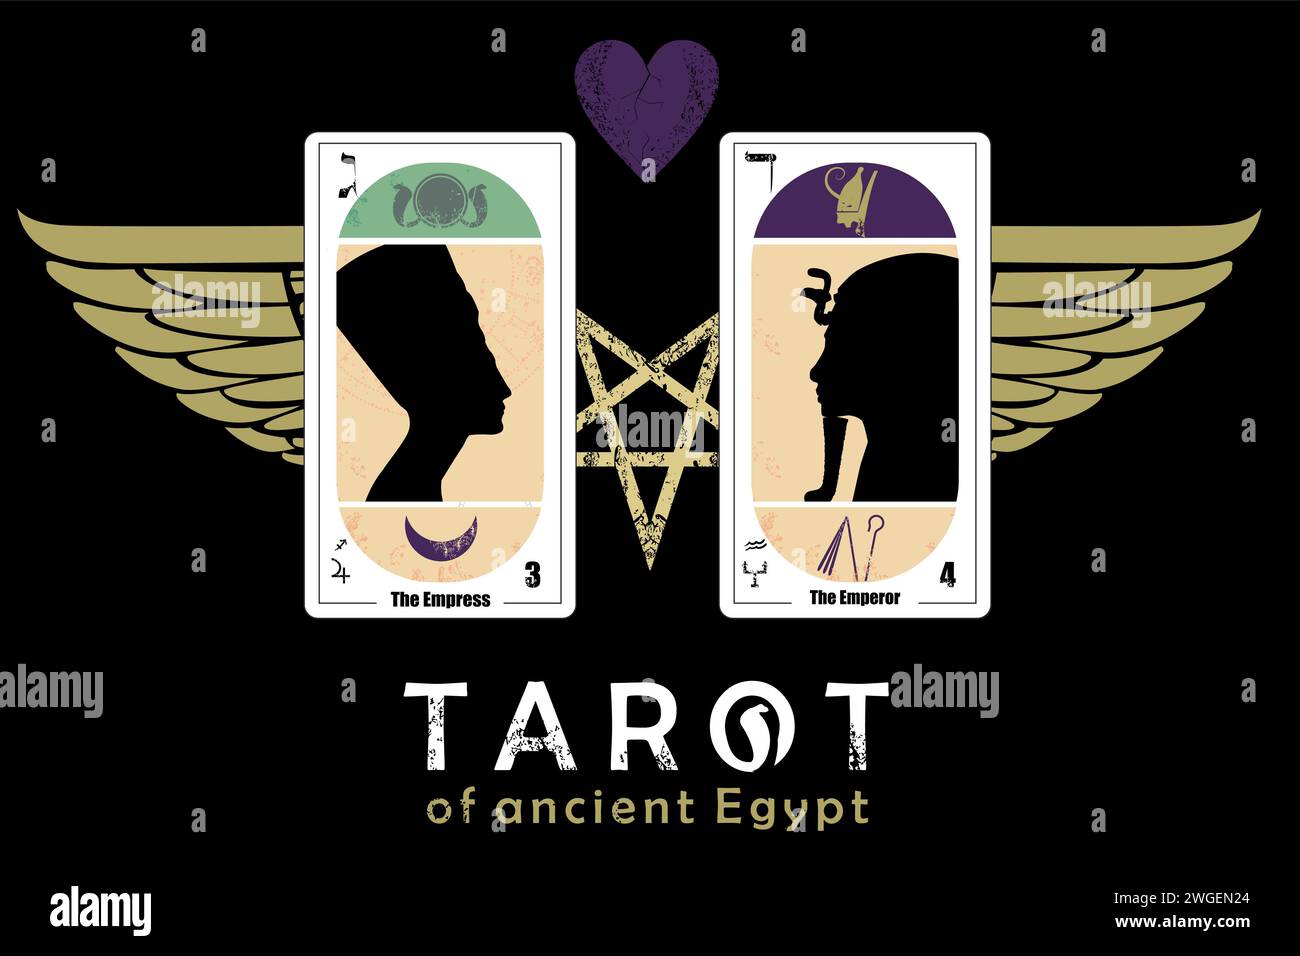 Tarot of ancient Egypt. T-shirt design of the cards called The Empress and The Emperor along with a star, wings and a heart Stock Vector